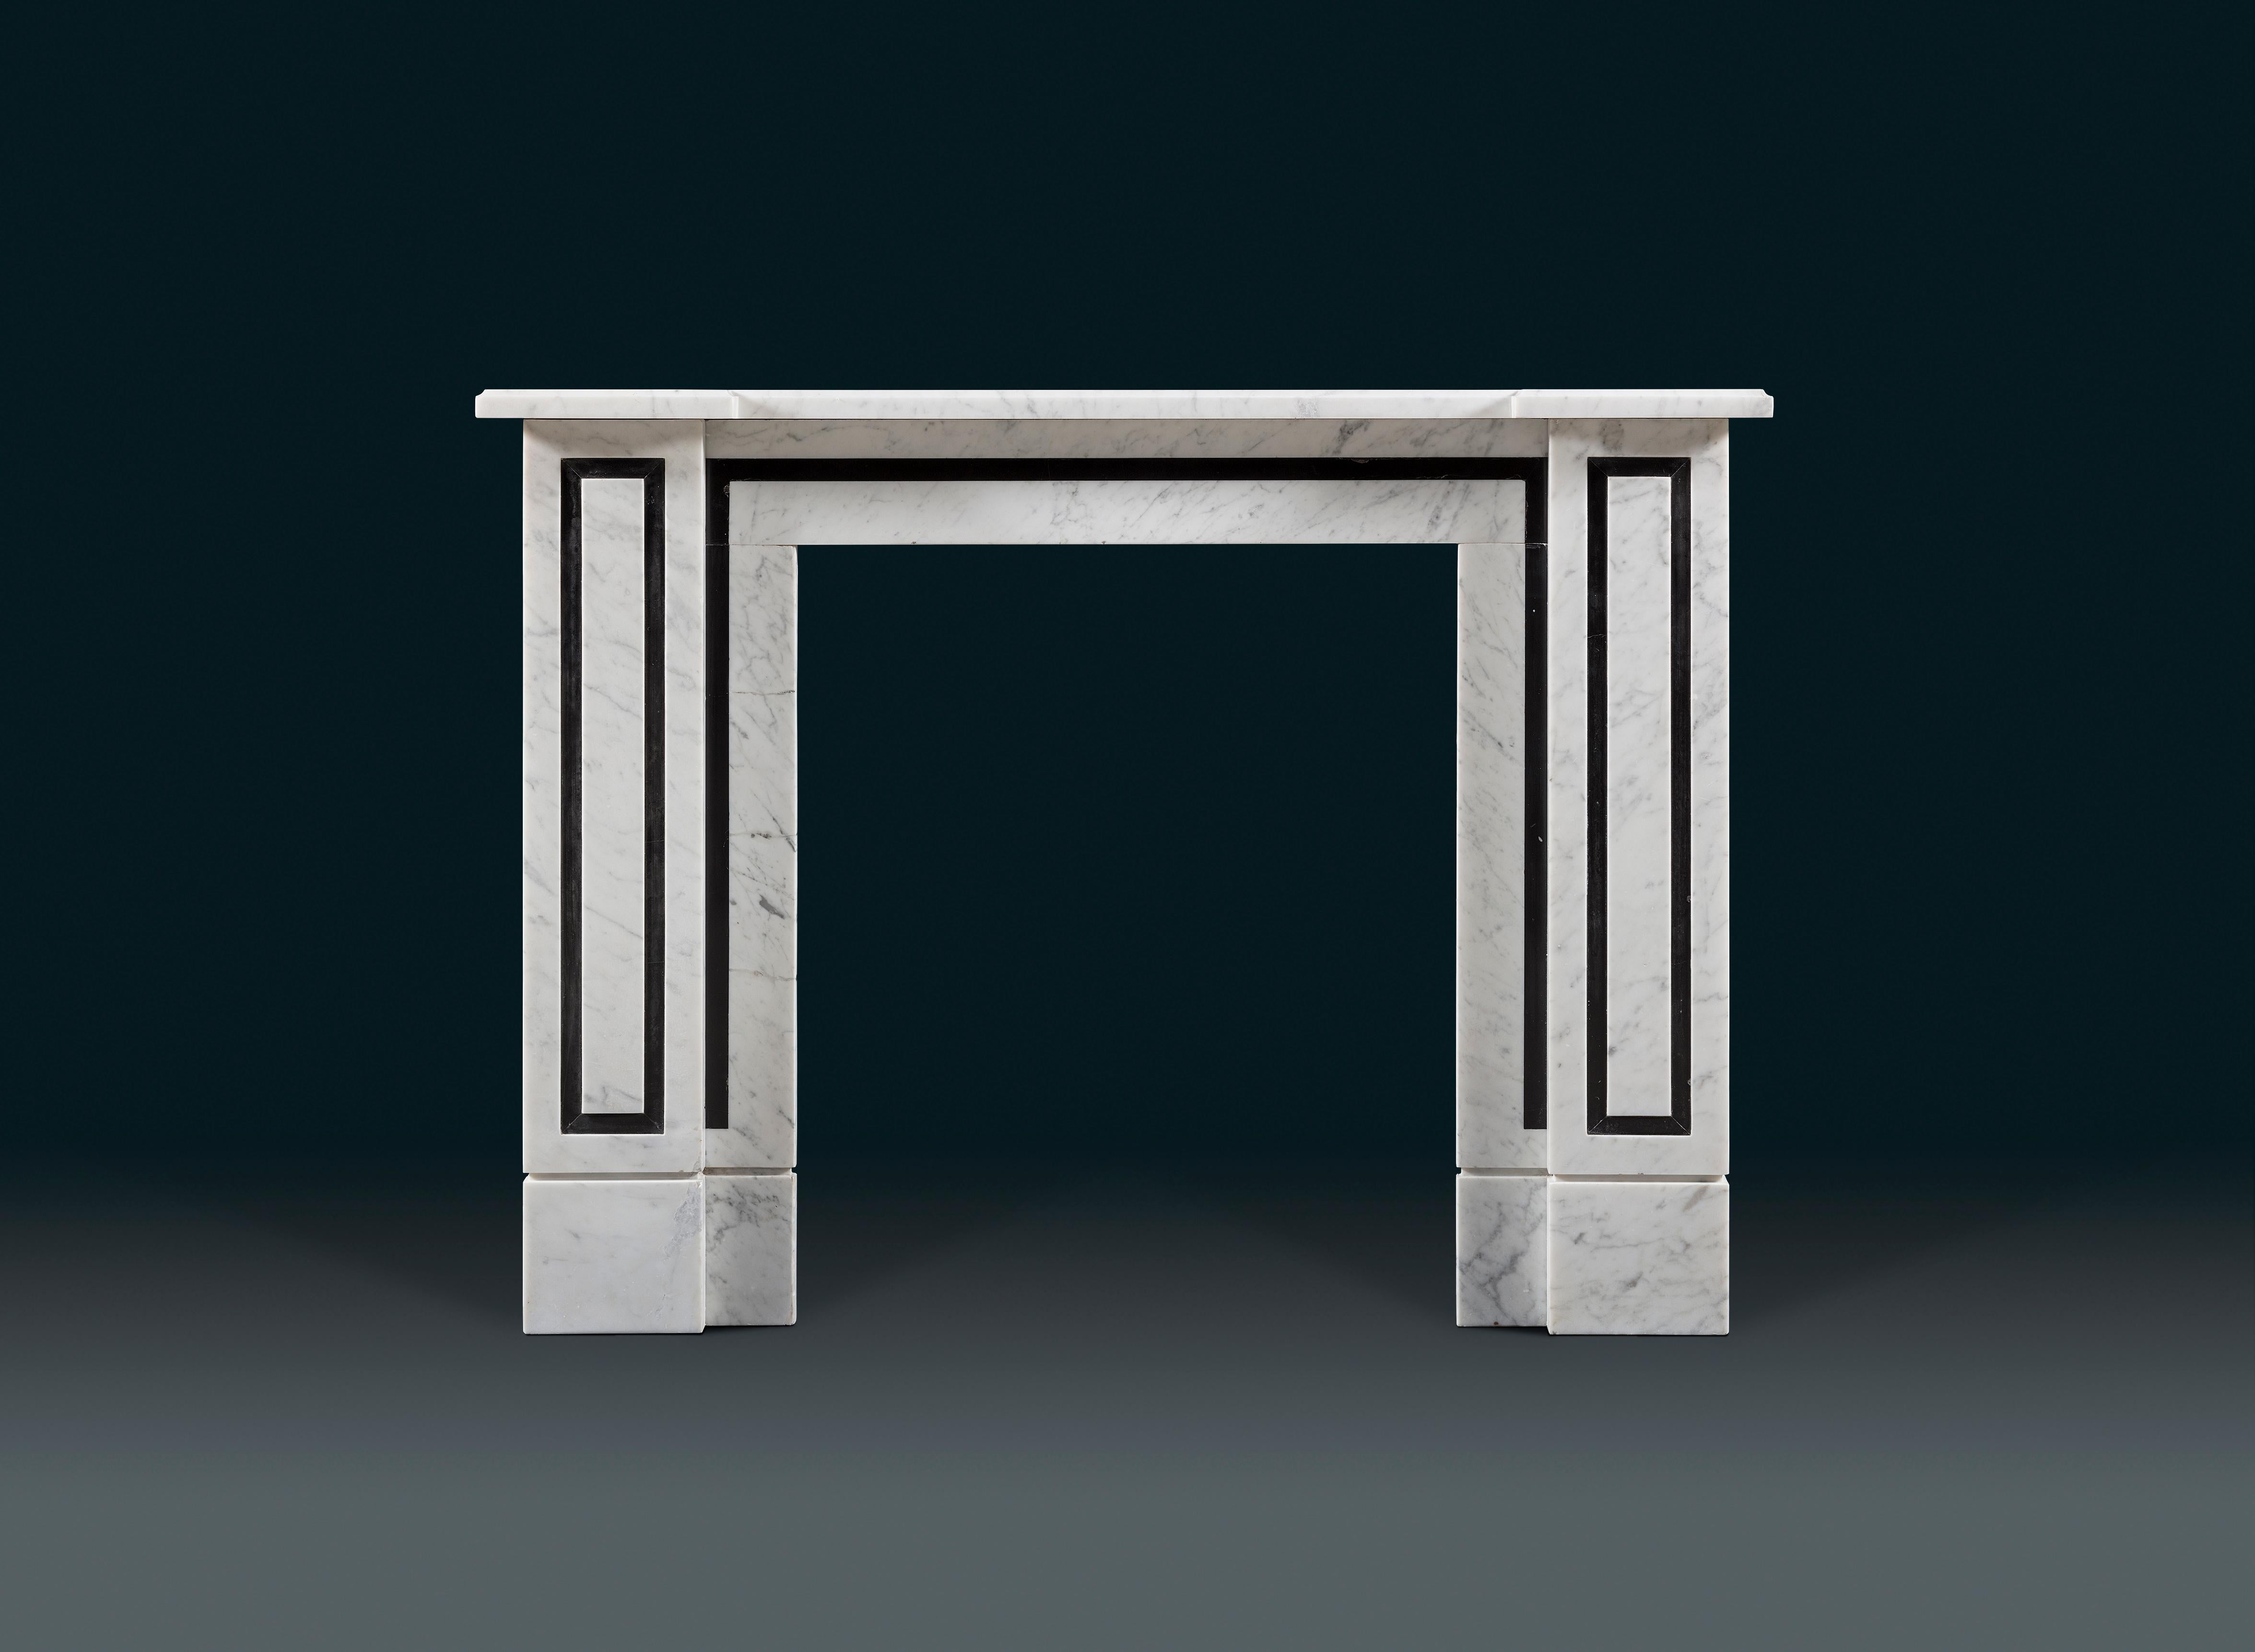 A Regency chimneypiece by Sir John Soane in Carrara marble and Welsh slate, originally from Pell Wall Hall in Market Drayton, Shropshire.
The overall proportions are of very unusual diminutive scale, indicative of a bedroom chimneypiece. Soane